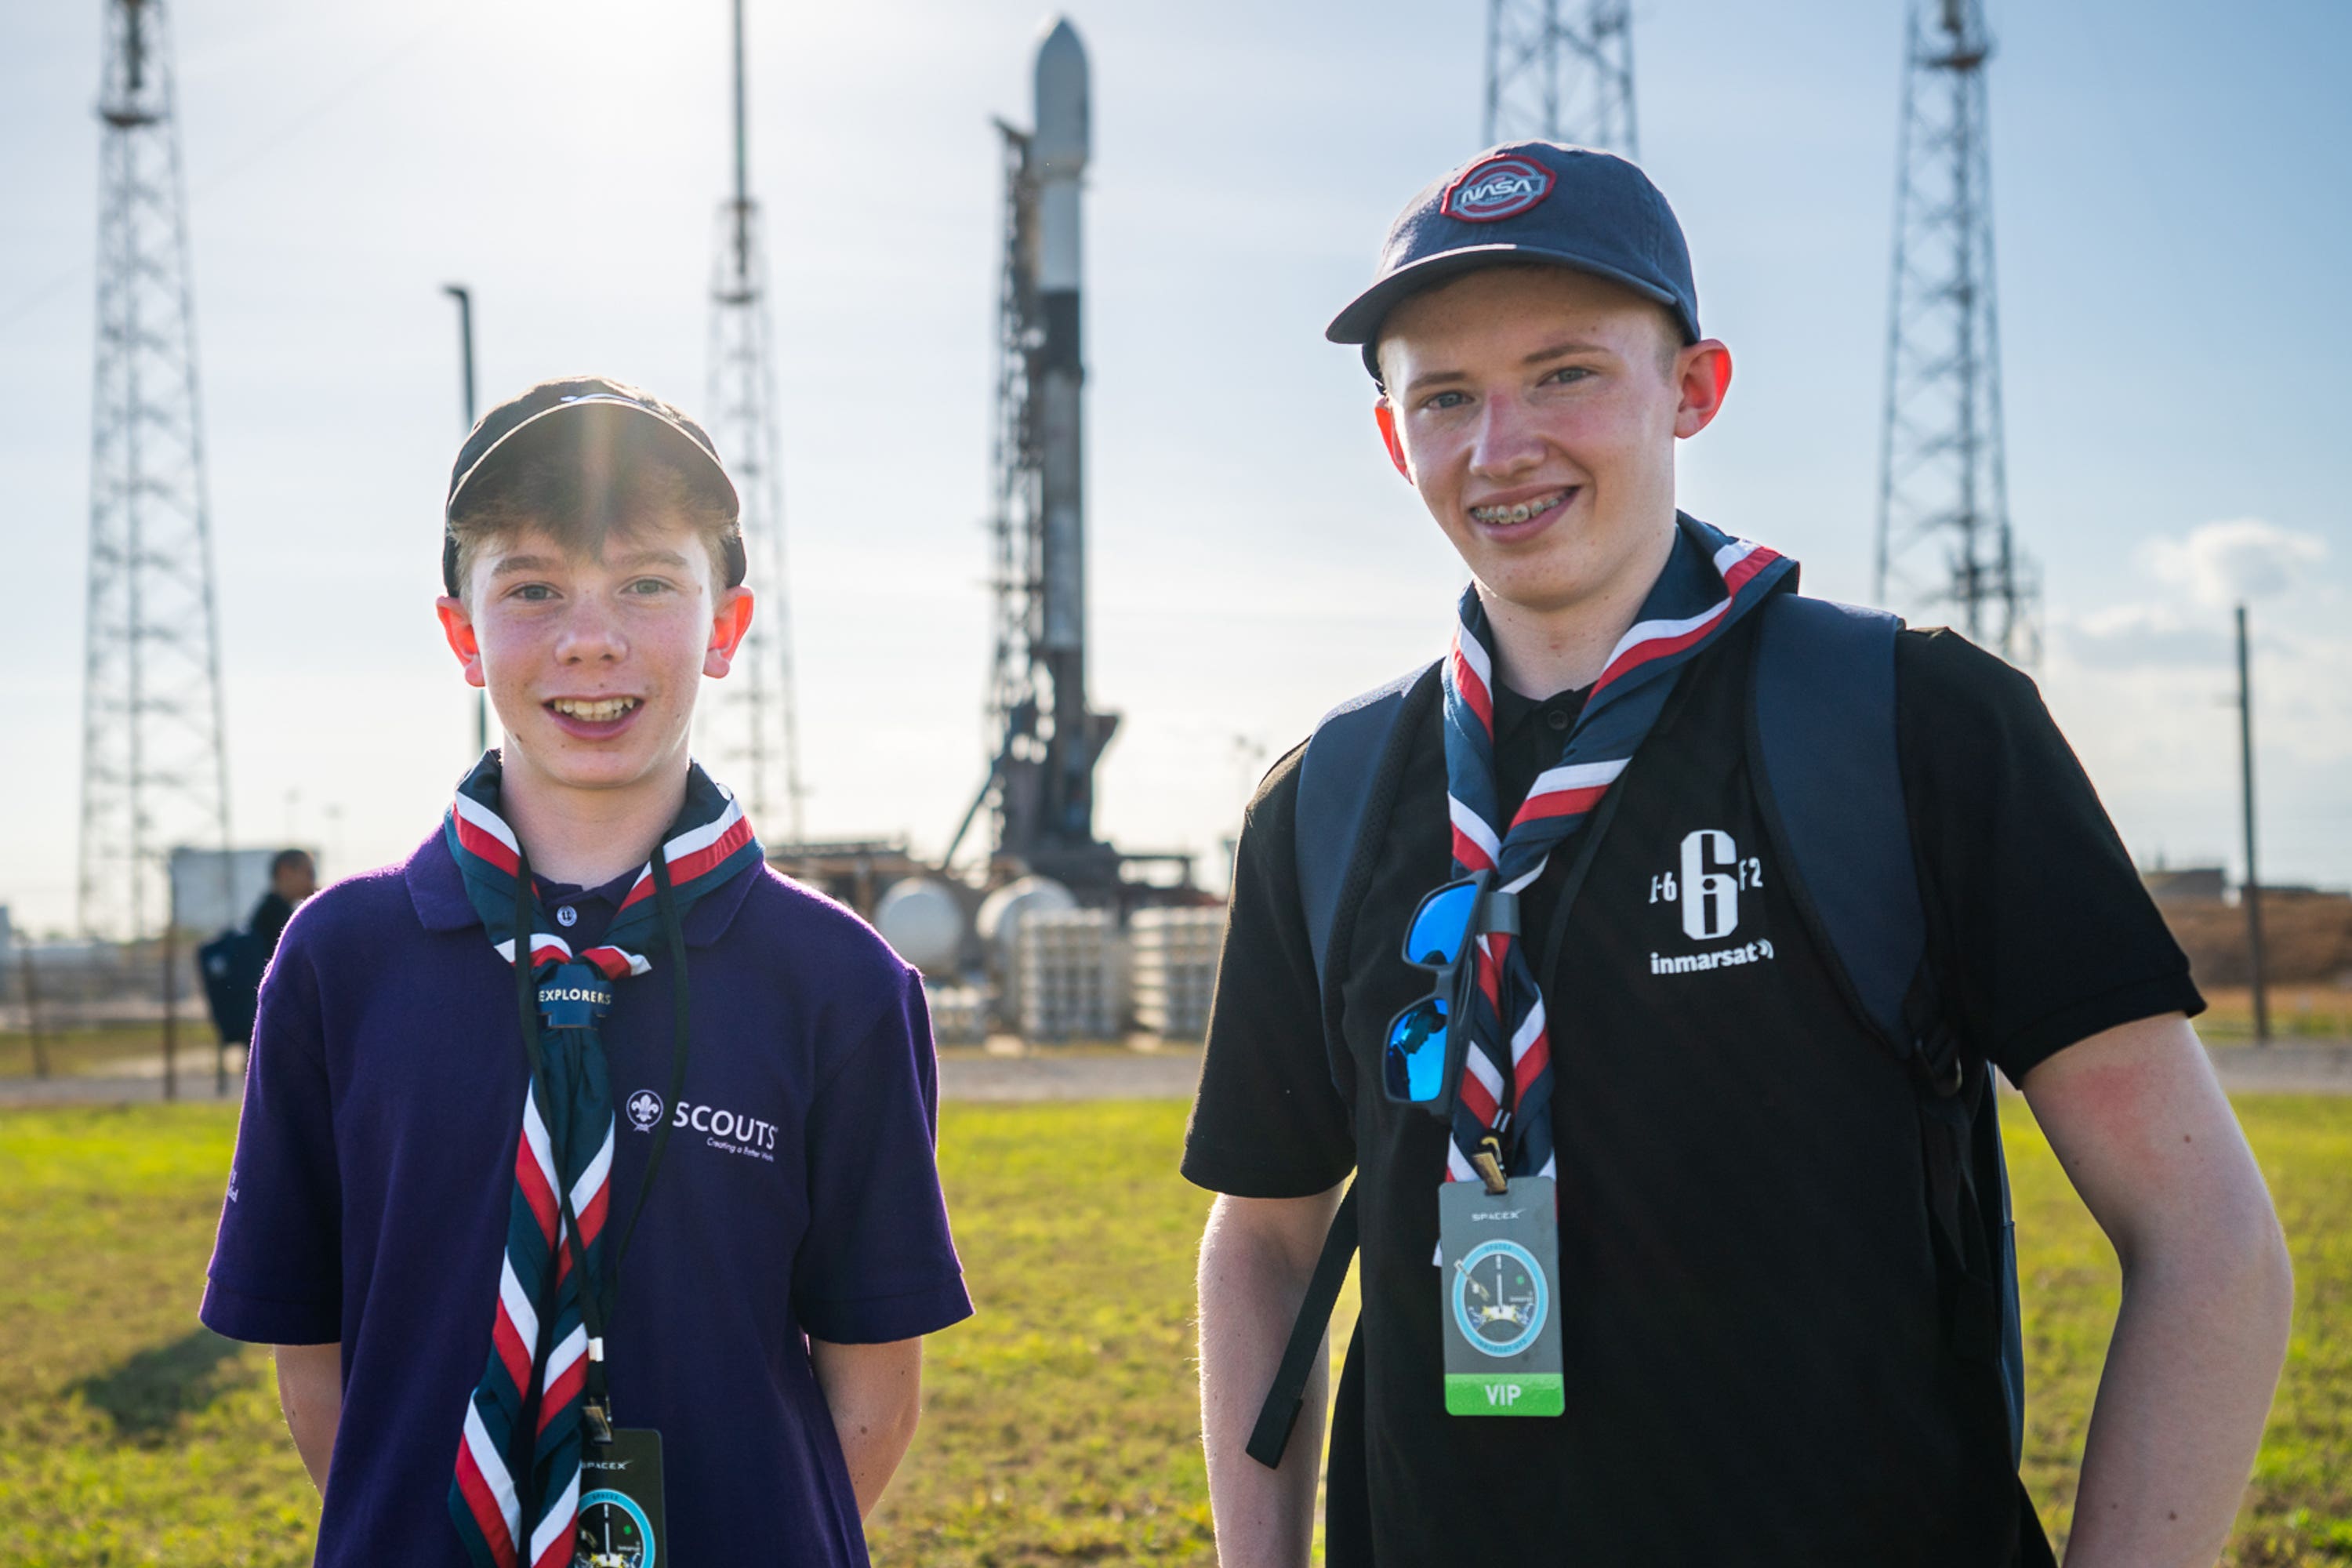 Craig Alexander, 14, from Reading and Simon Shemetilo, 16, (right) from Tower Hamlets, who had exclusive access to a space launch in Florida (Ralph Hewitt/Scouts Association/PA)